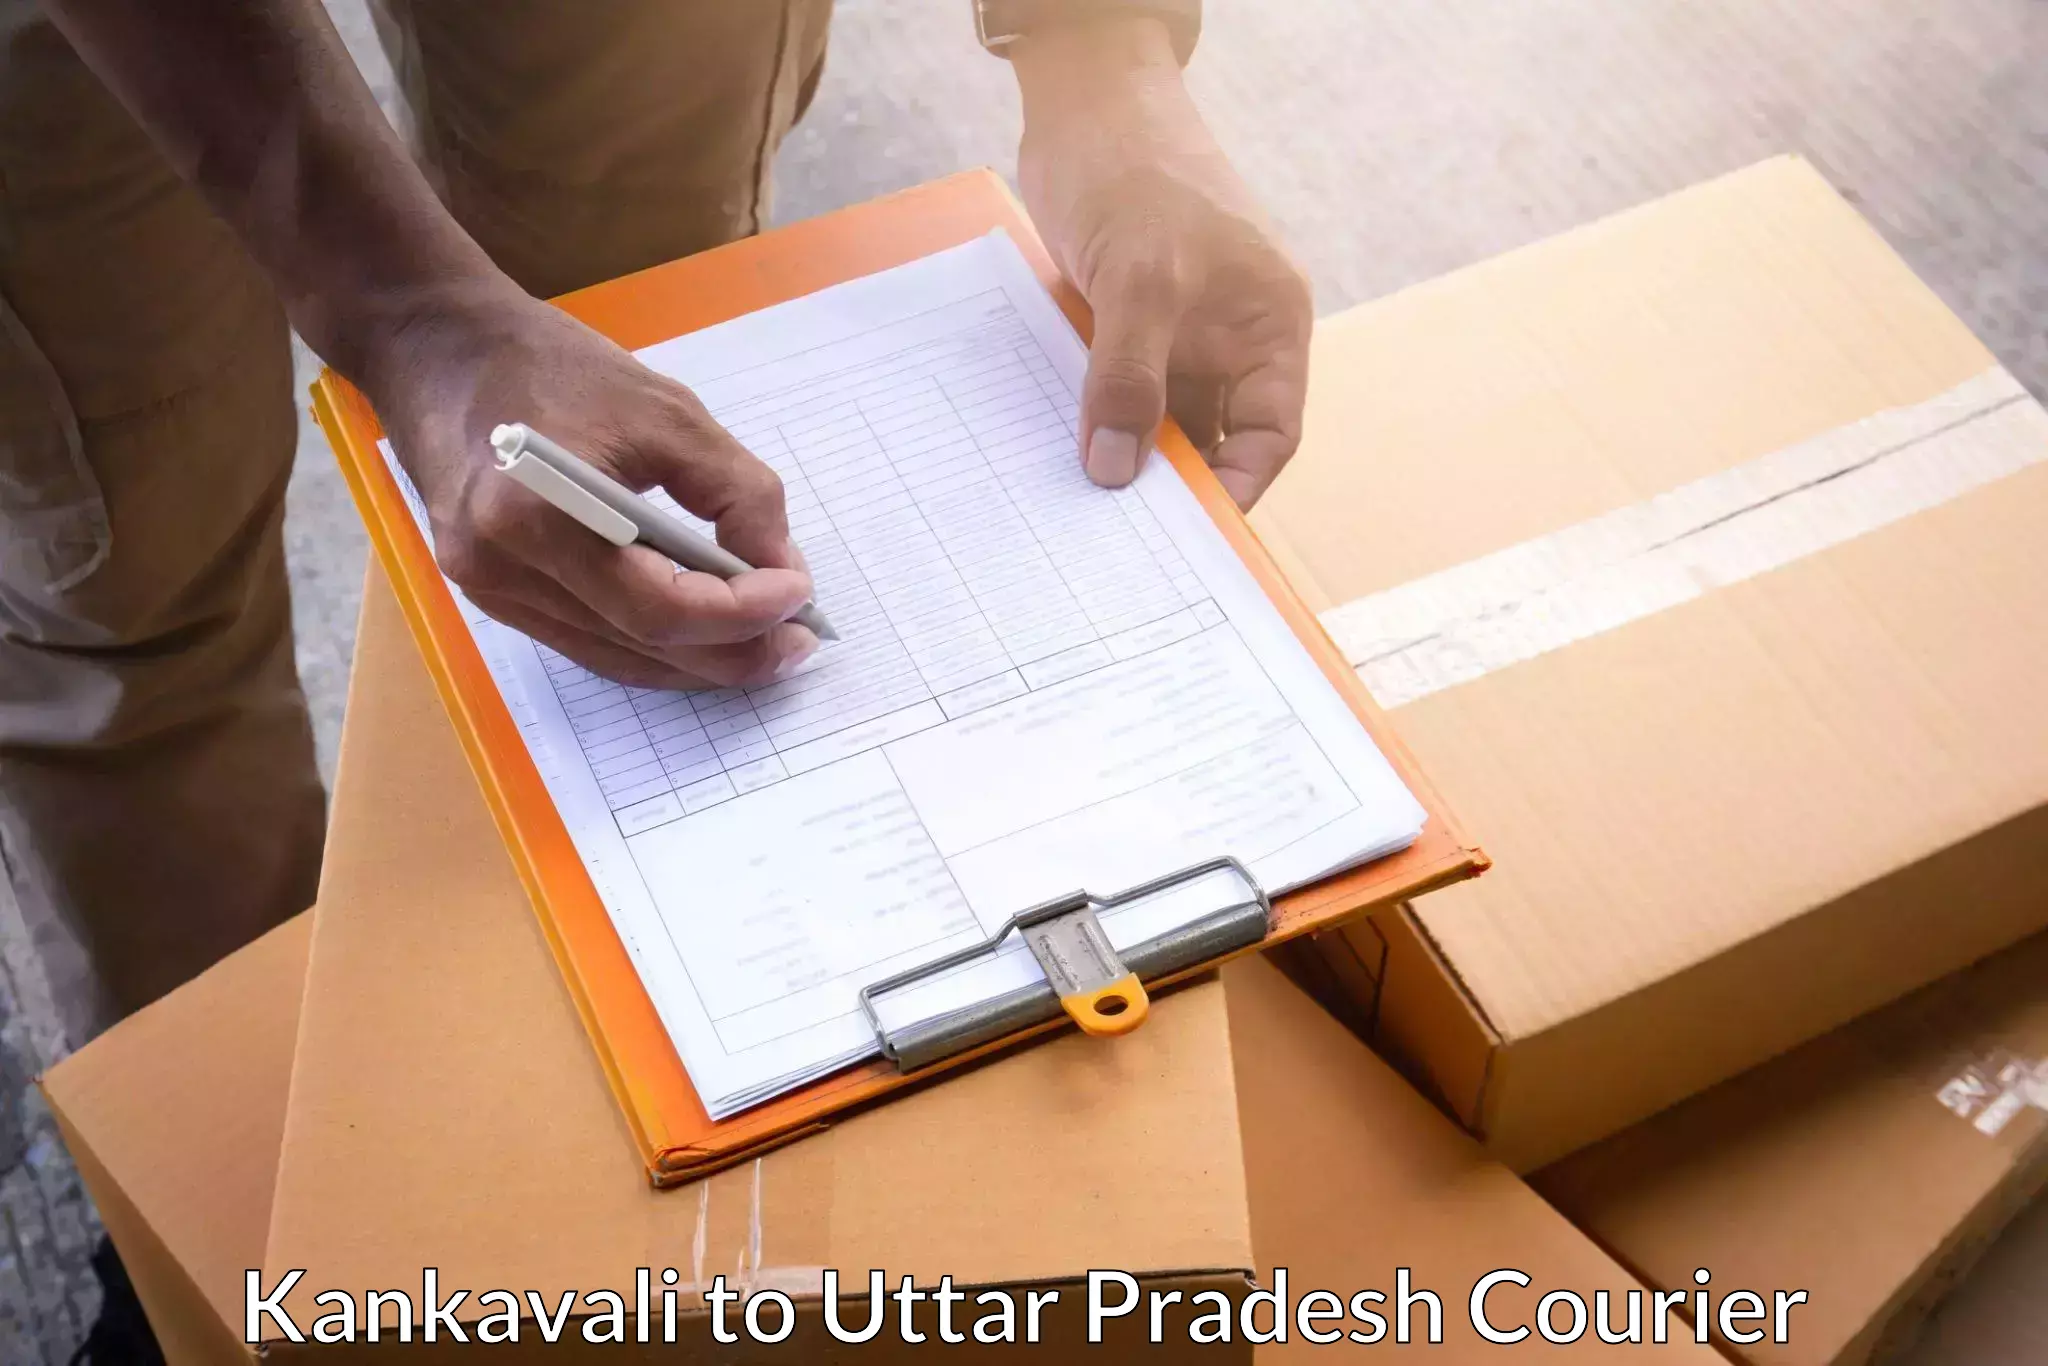 Quick courier services Kankavali to IIIT Lucknow